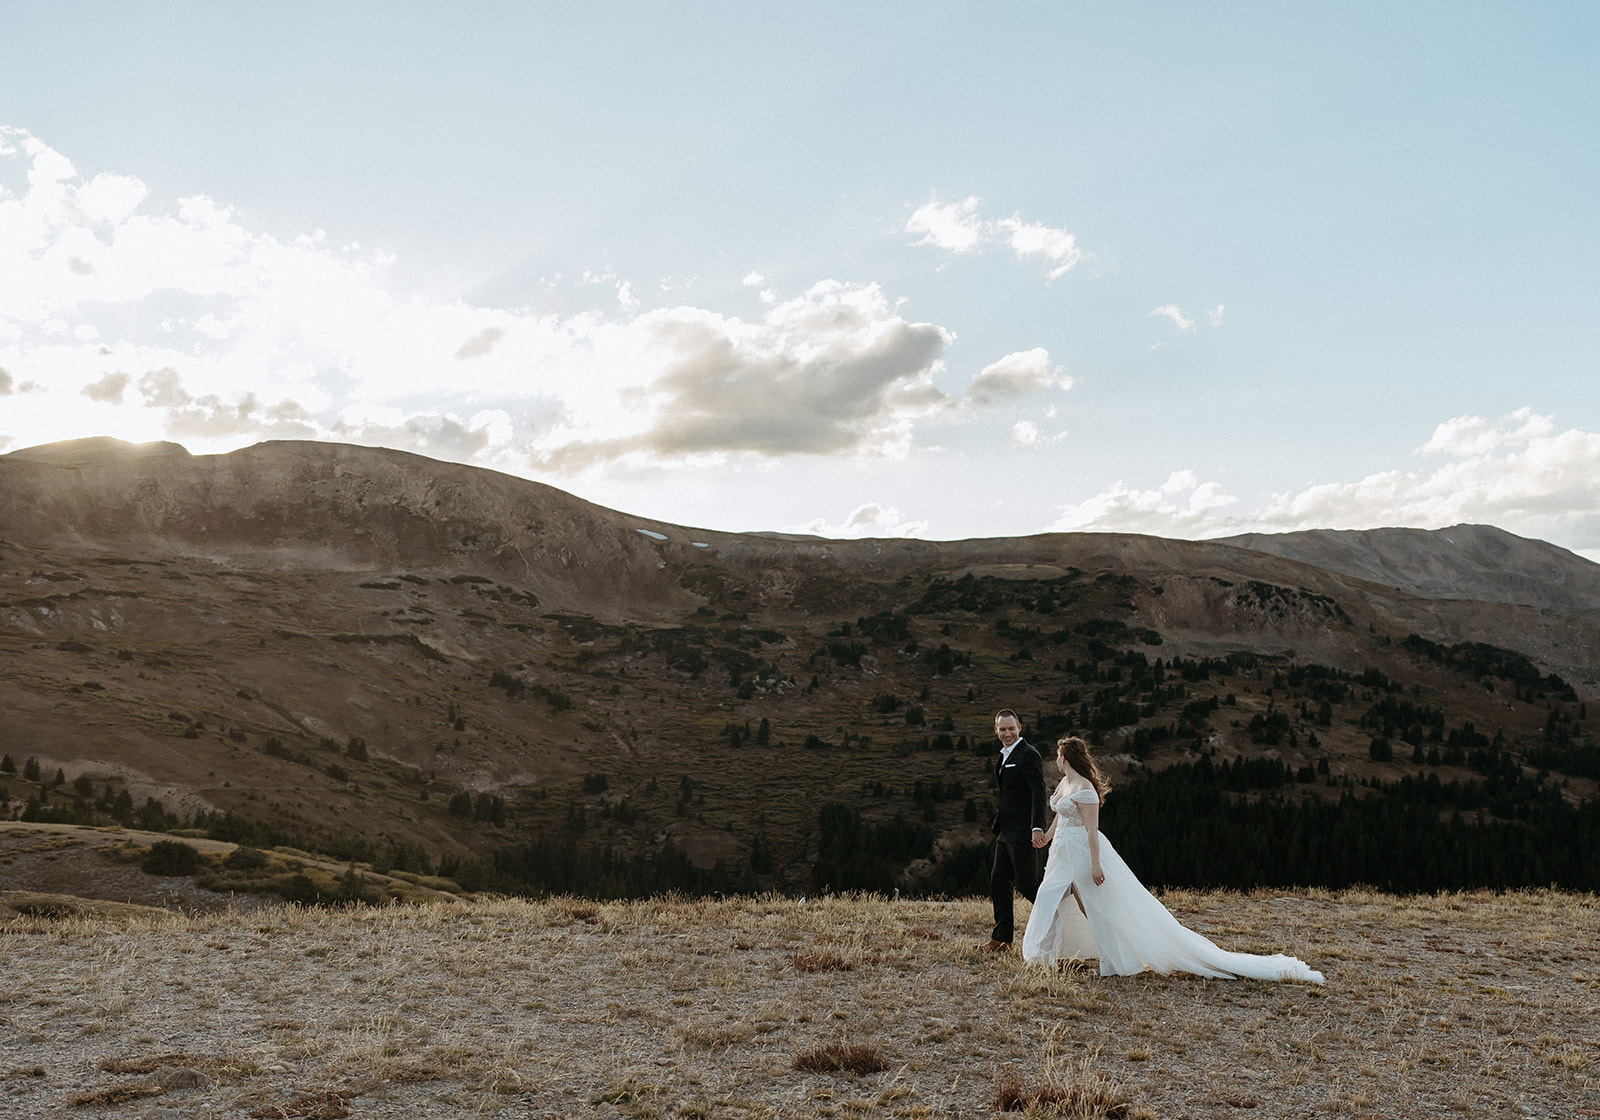 Newlyweds hold hands while walking through a remote mountain trail at sunset